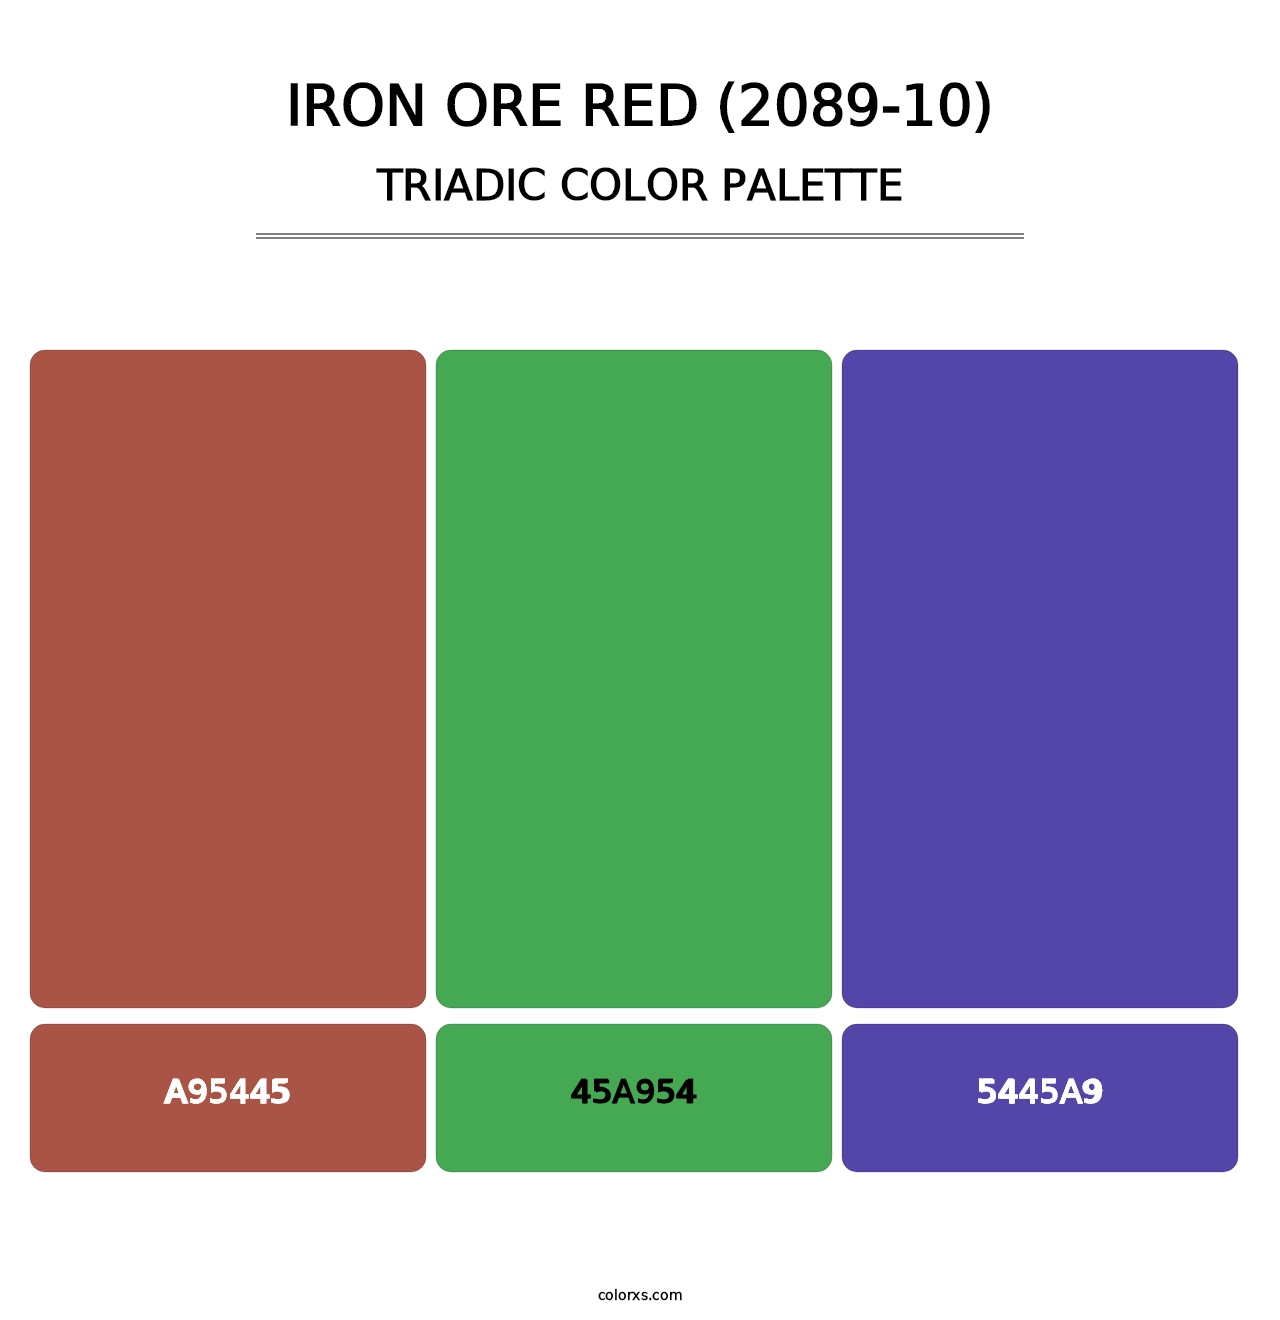 Iron Ore Red (2089-10) - Triadic Color Palette